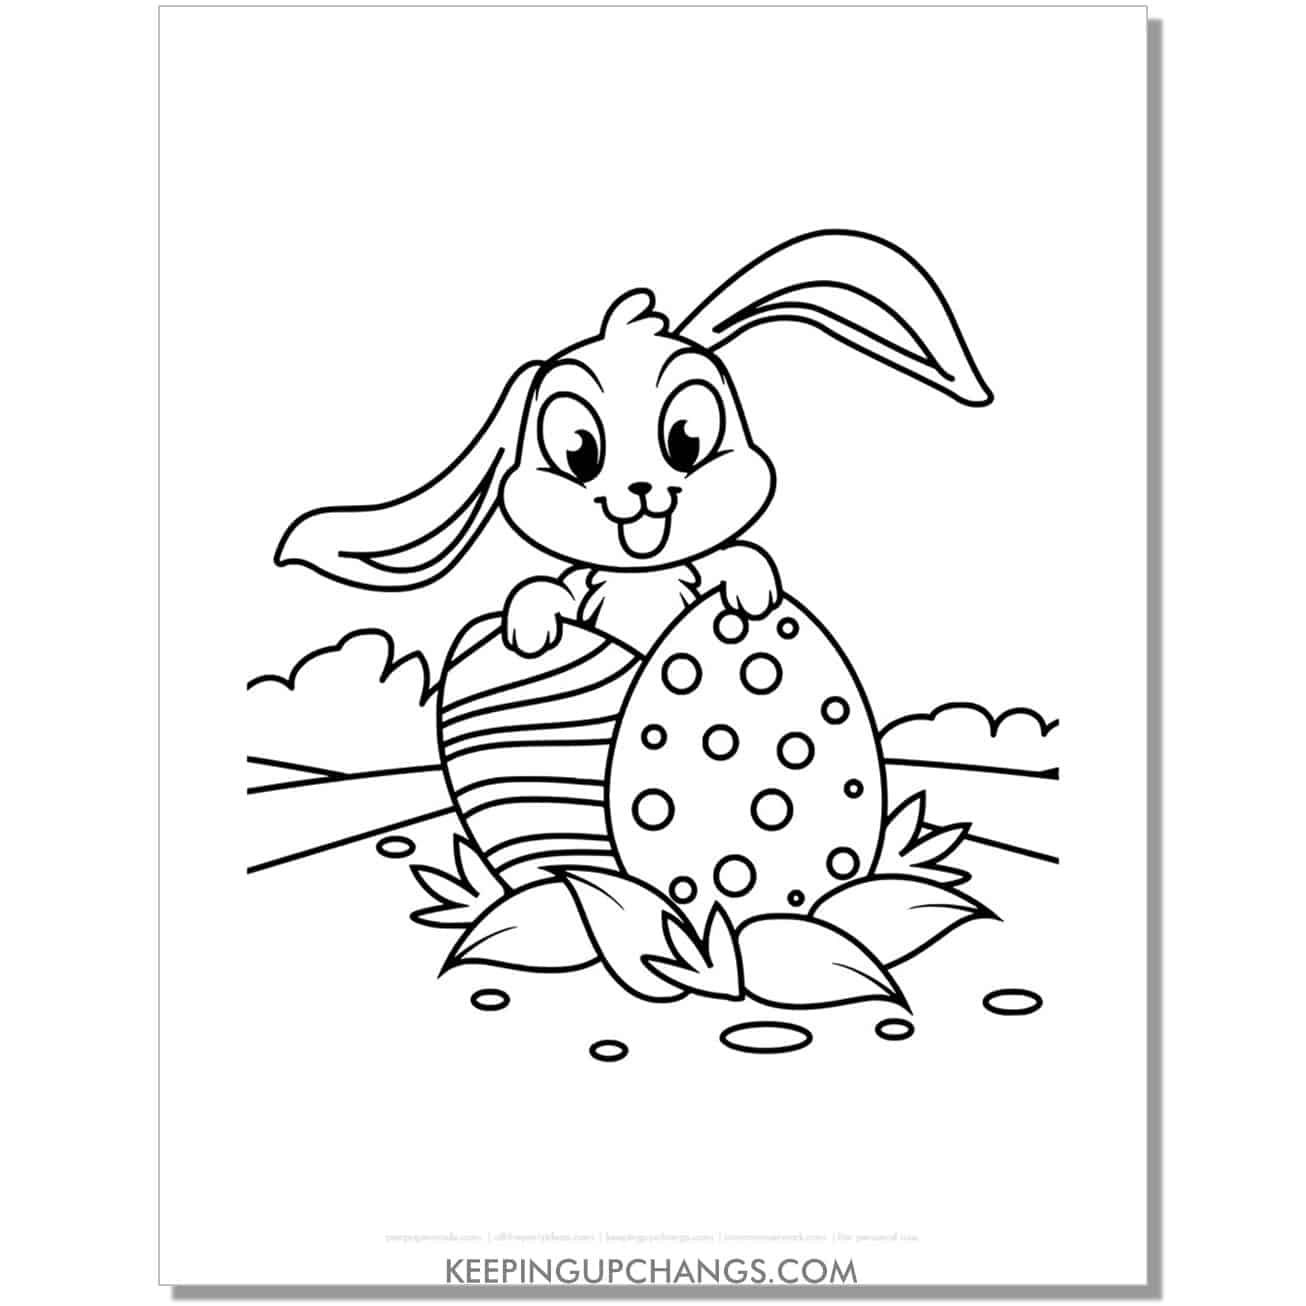 cute easter bunny with striped and spotted eggs coloring page, sheet.